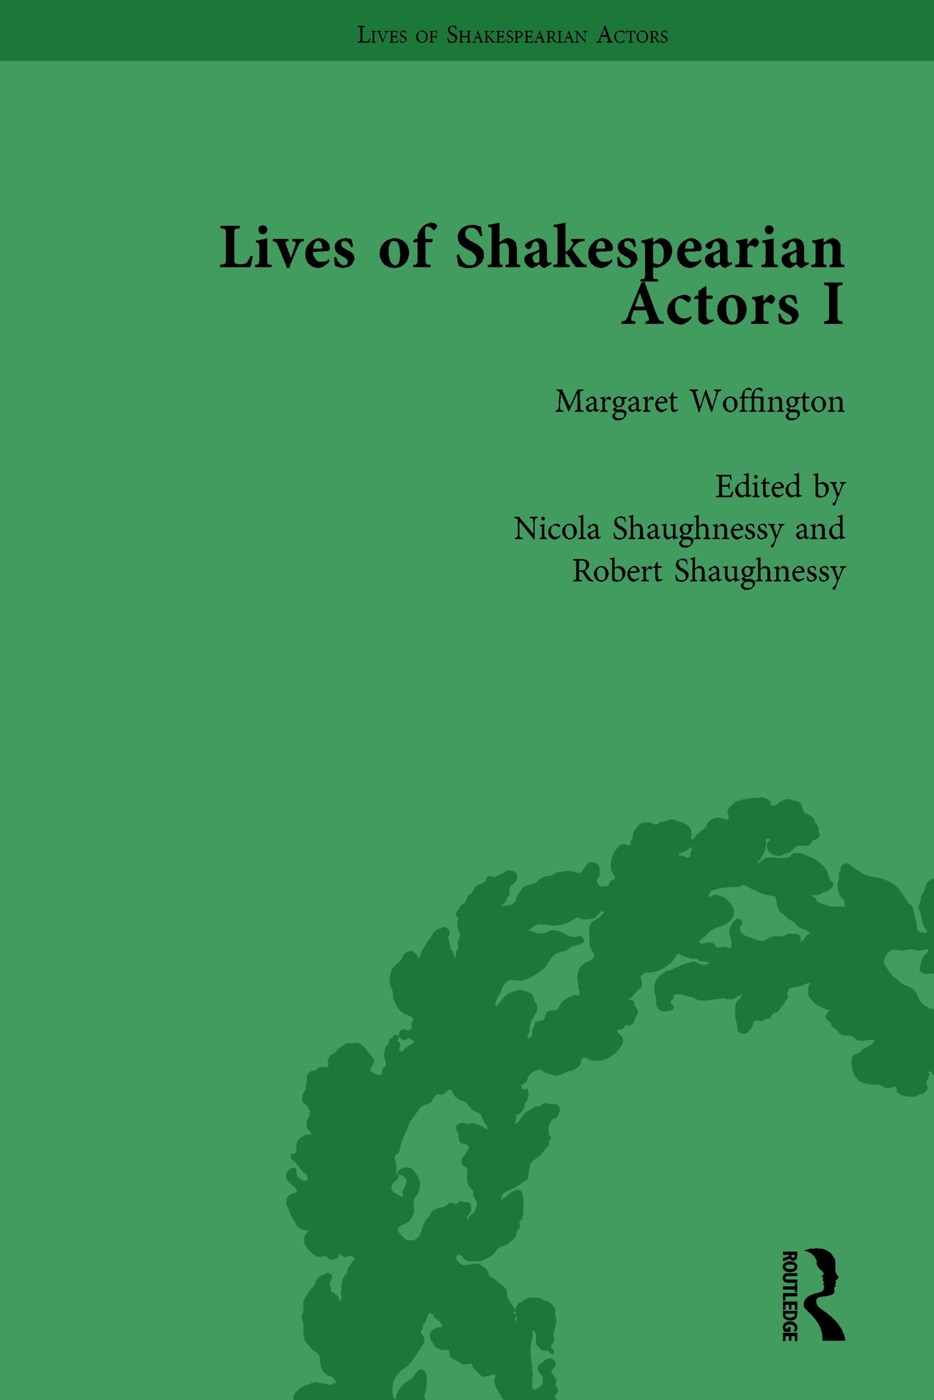 Lives of Shakespearian Actors, Part I, Volume 3: David Garrick, Charles Macklin and Margaret Woffington by Their Contemporaries